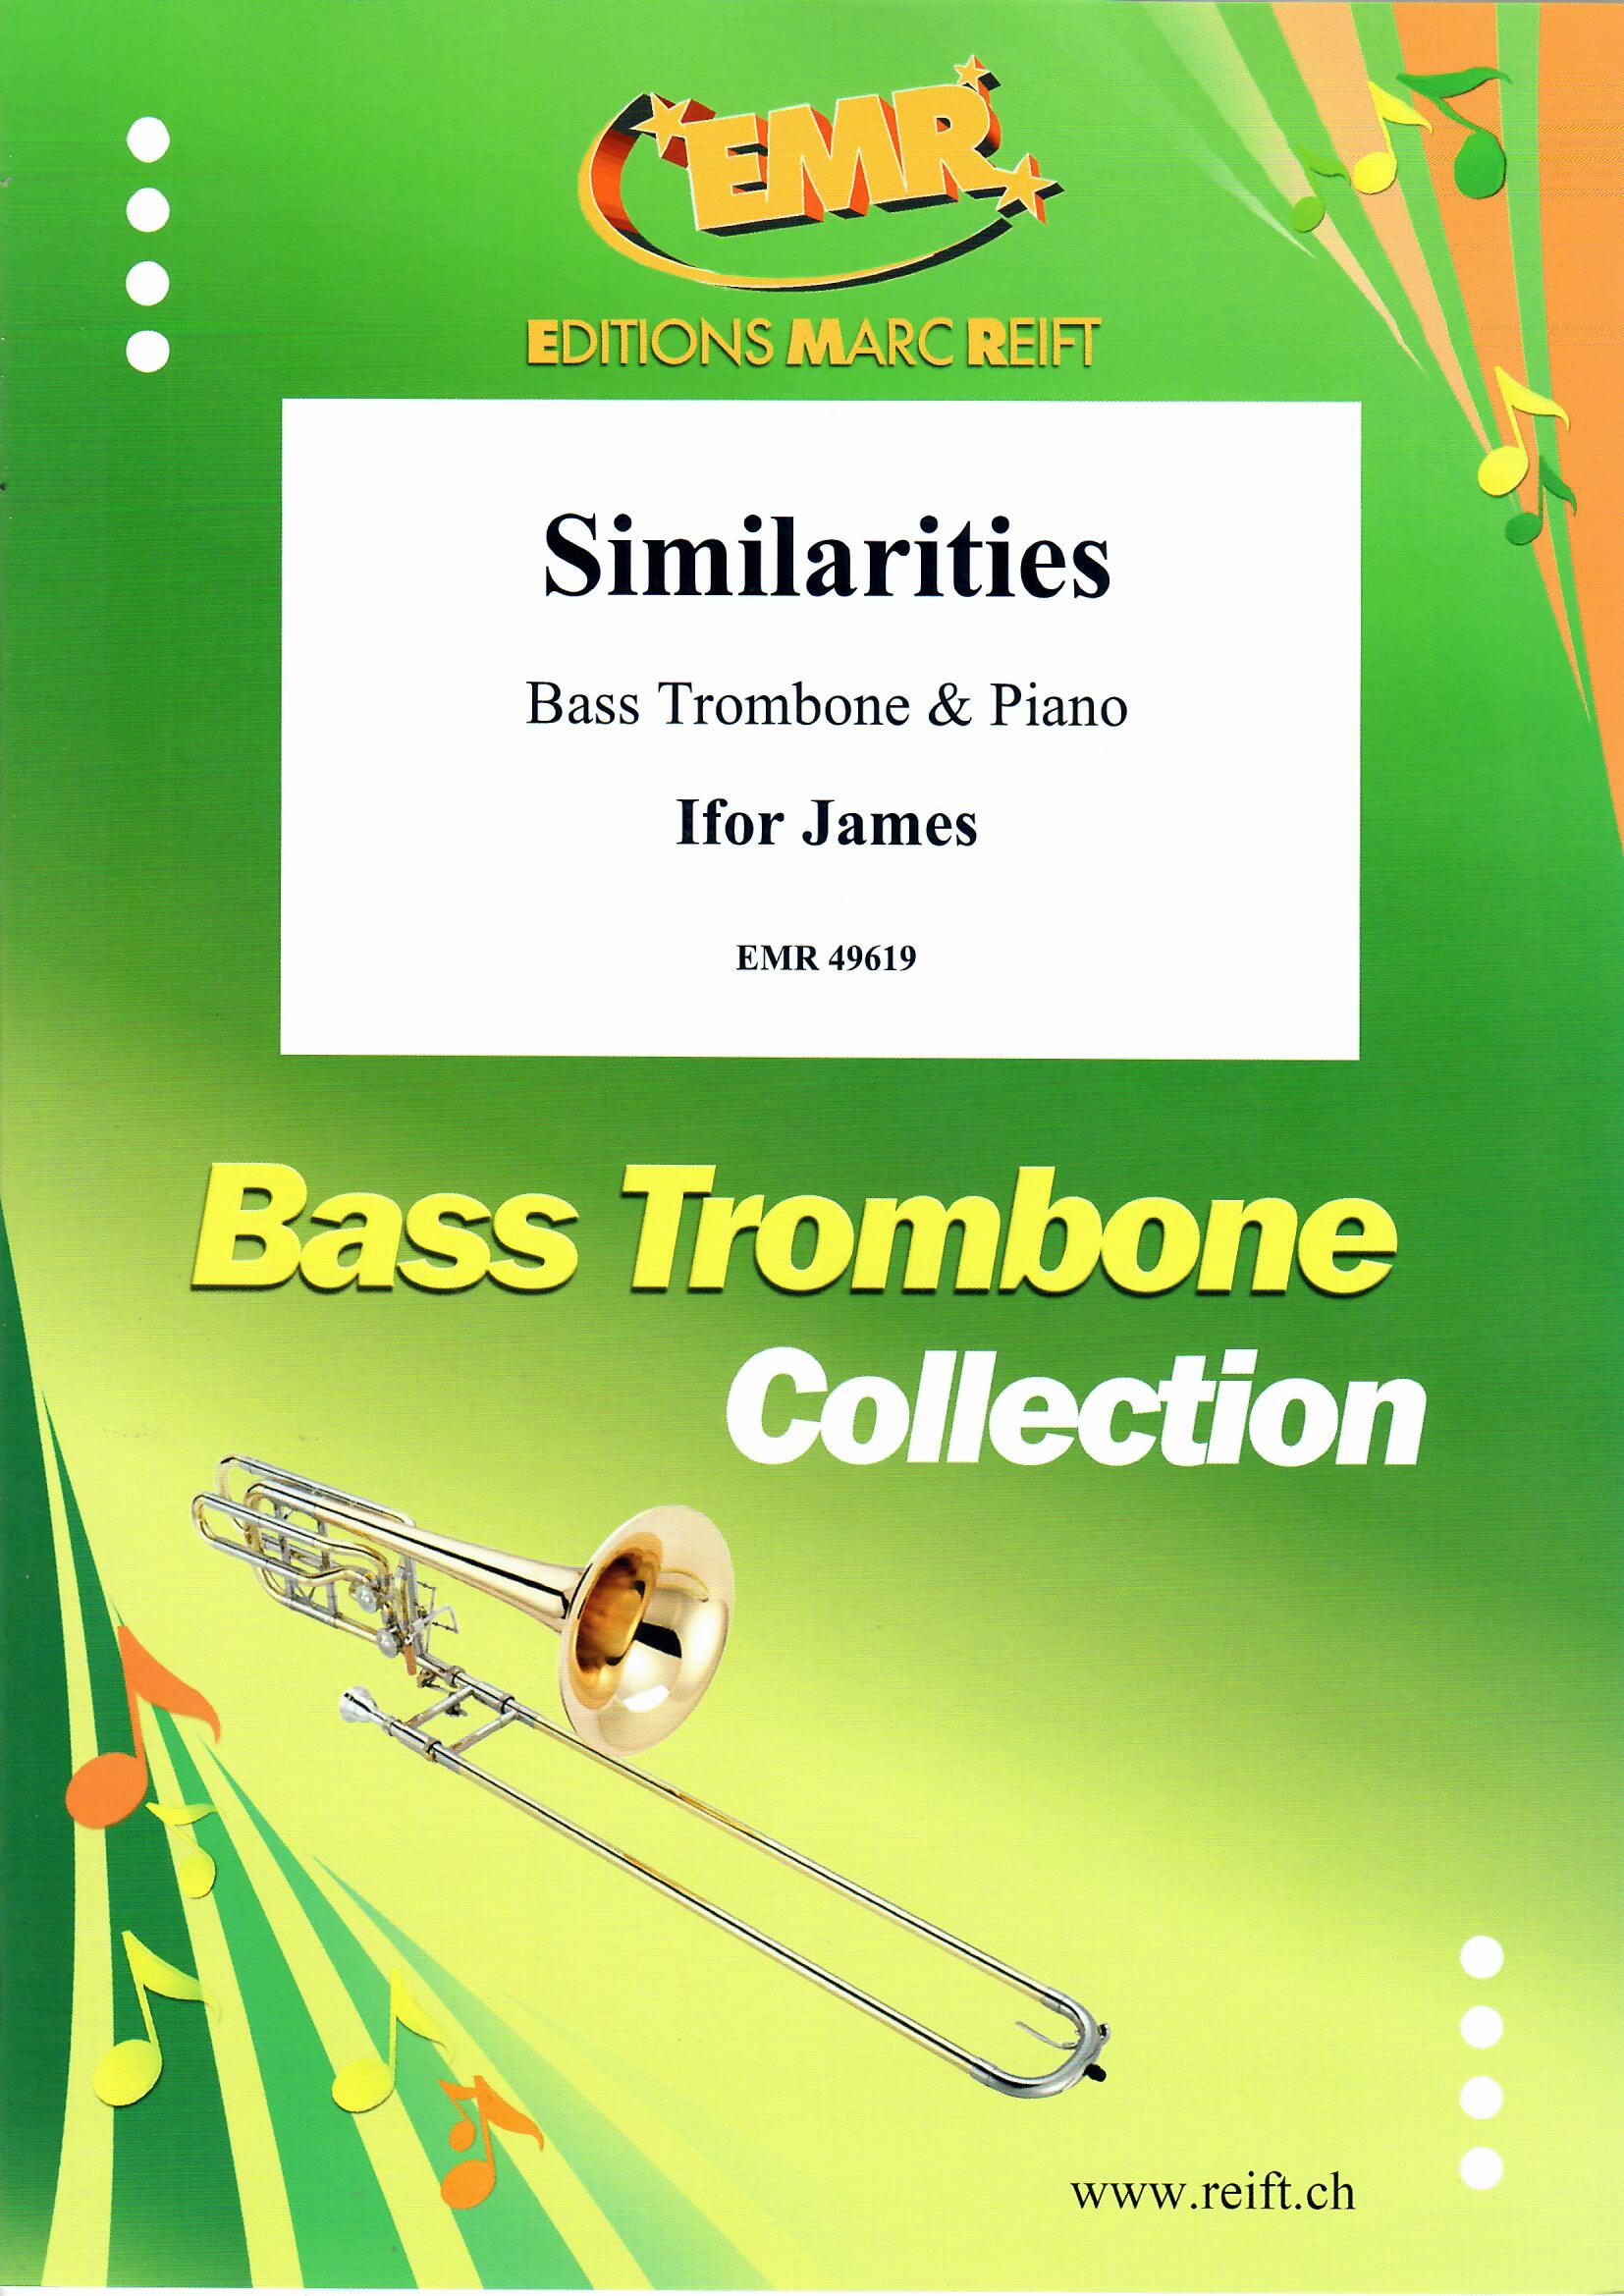 SIMILARITIES, NEW & RECENT Publications, SOLOS for Bass Trombone